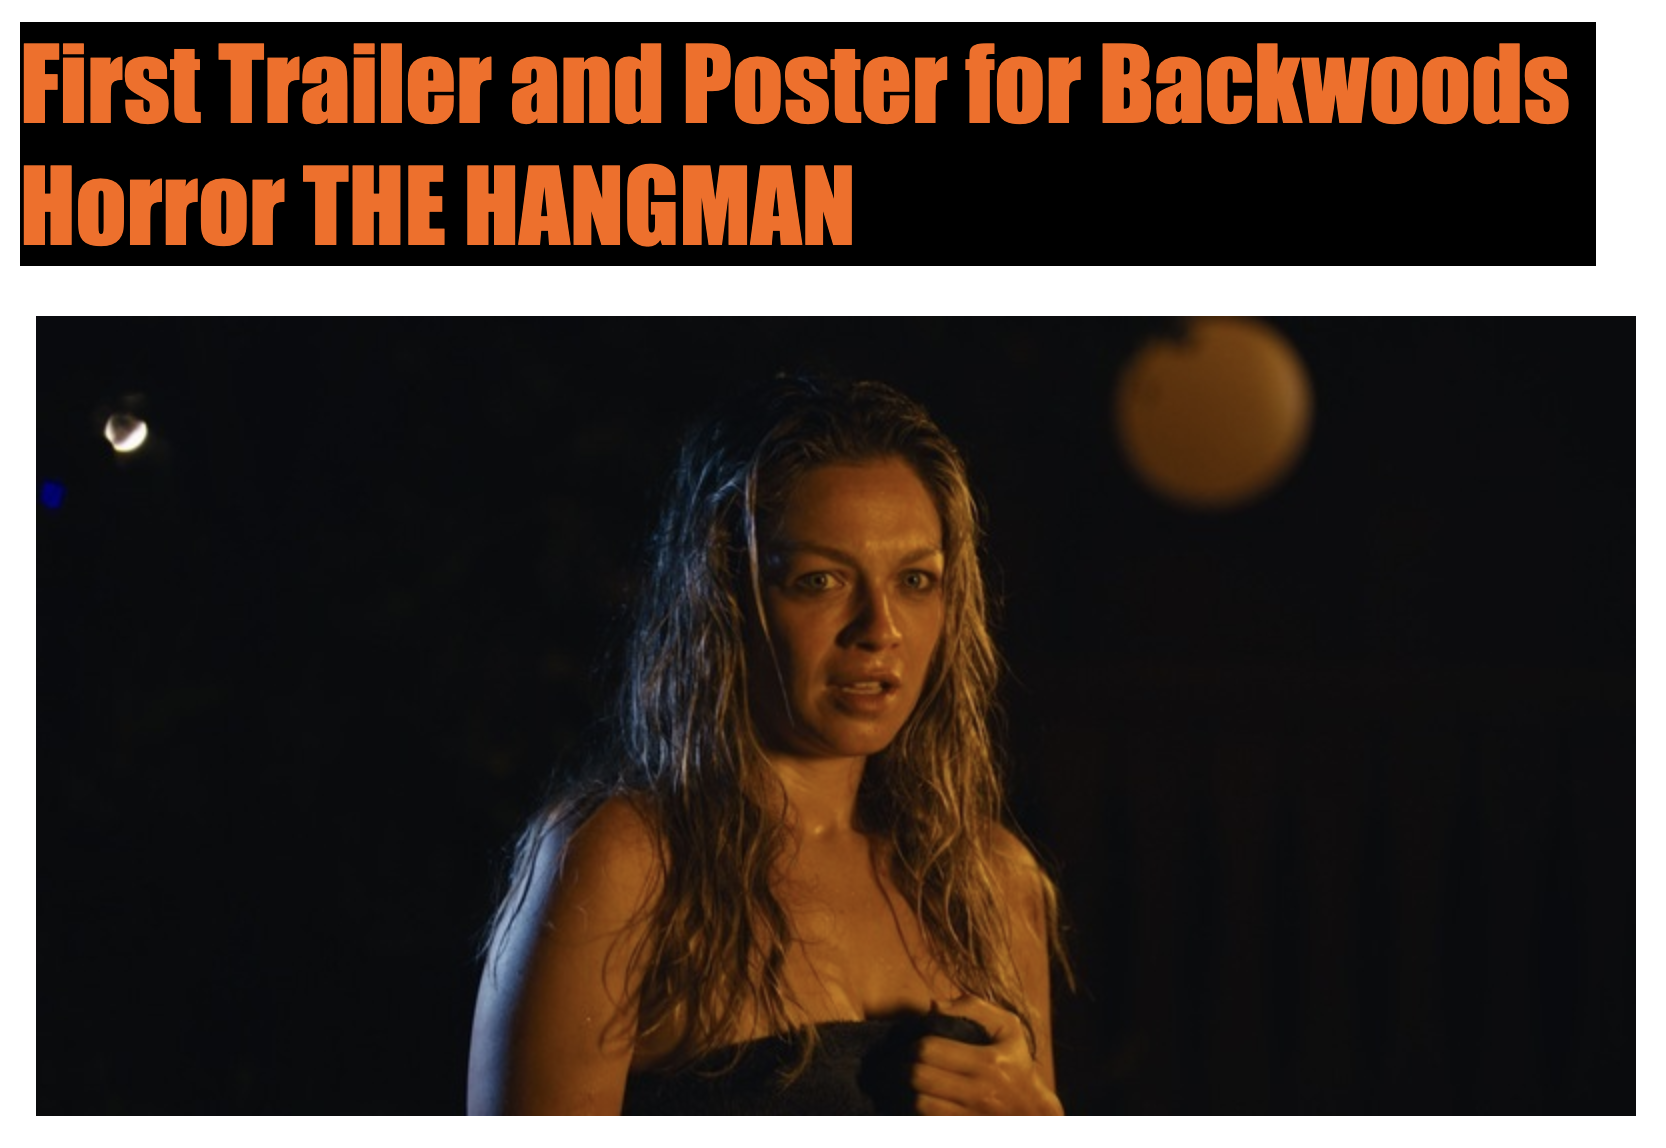 First Trailer and Poster for Backwoods Horror THE HANGMAN